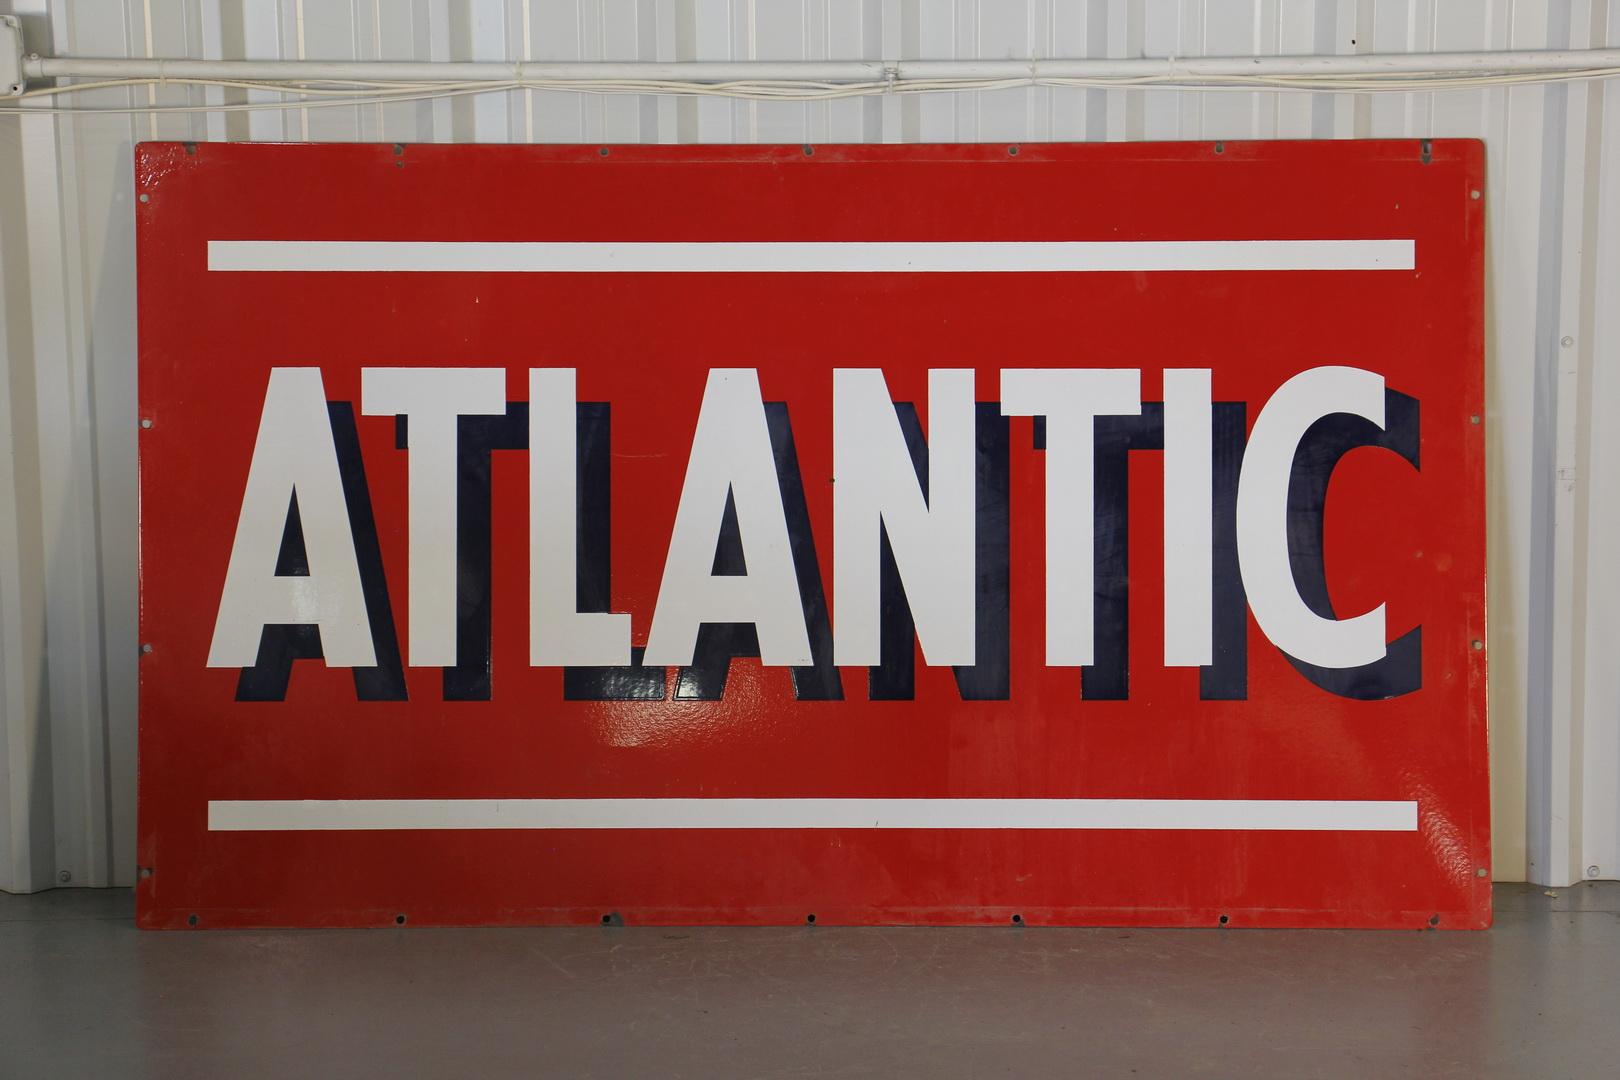 ATLANTIC Gas Station Double-Sided Porcelain Sign